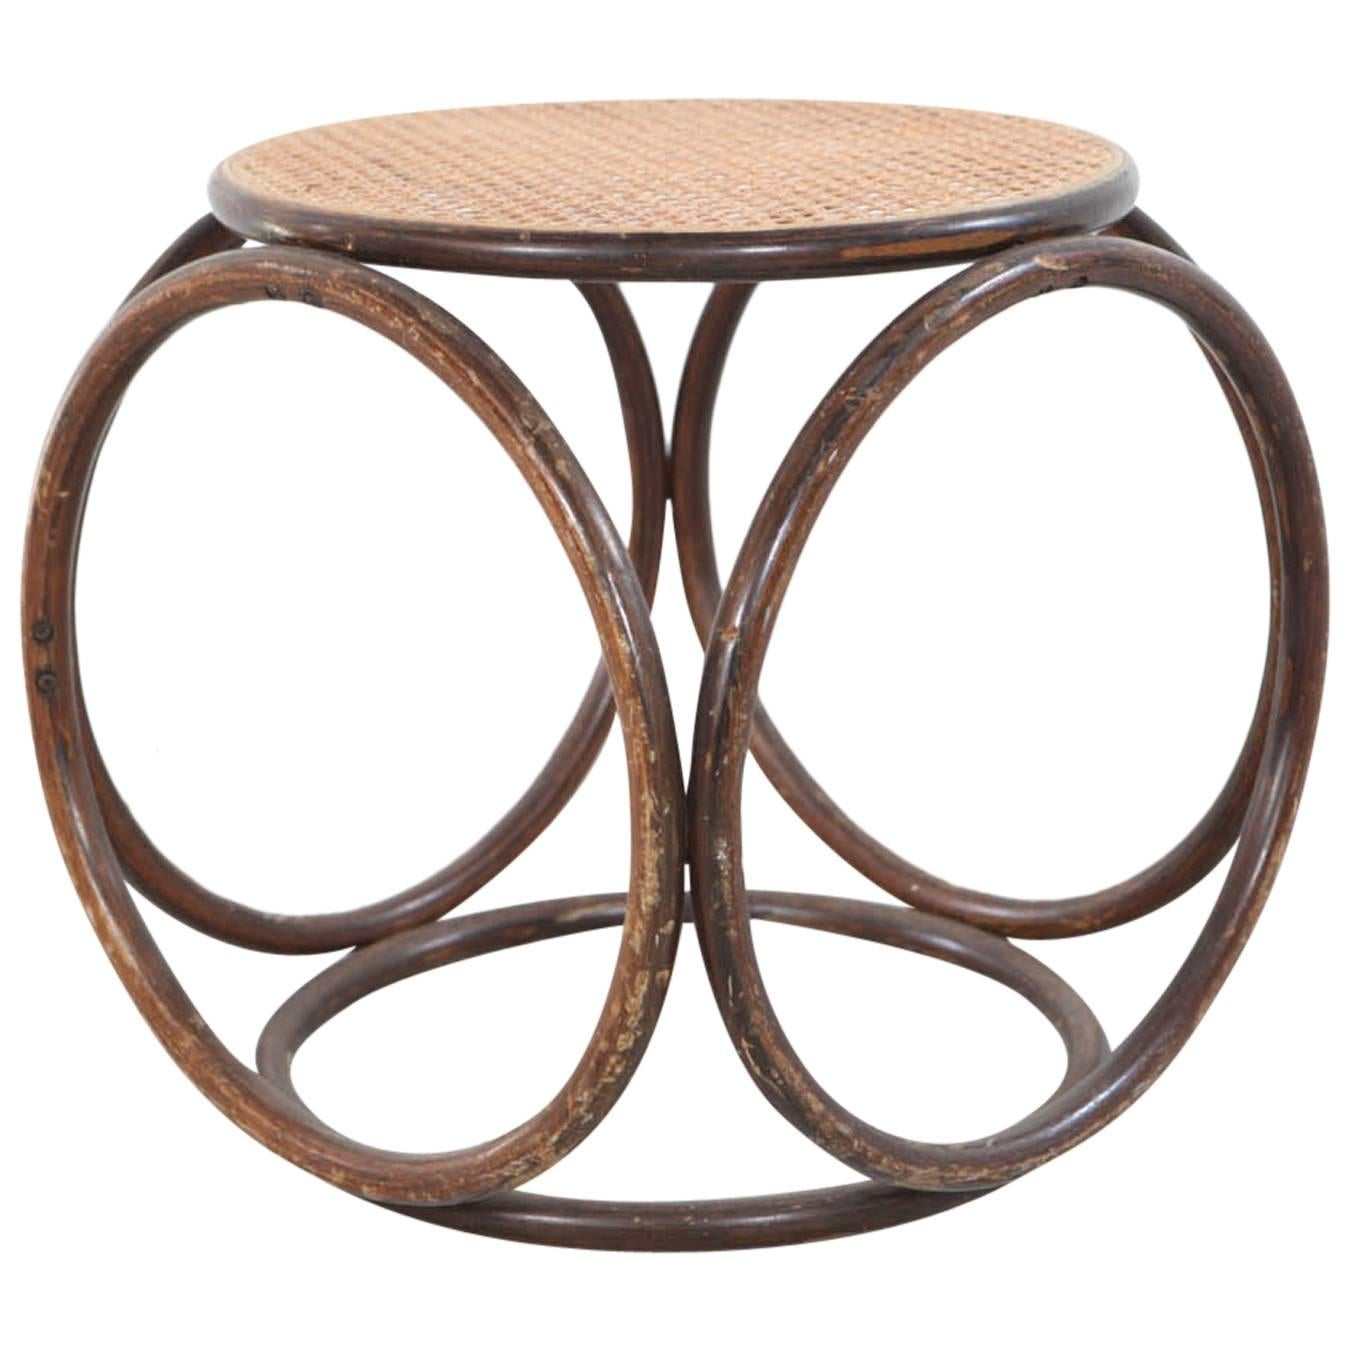 Round Bamboo Stool with Cane Top